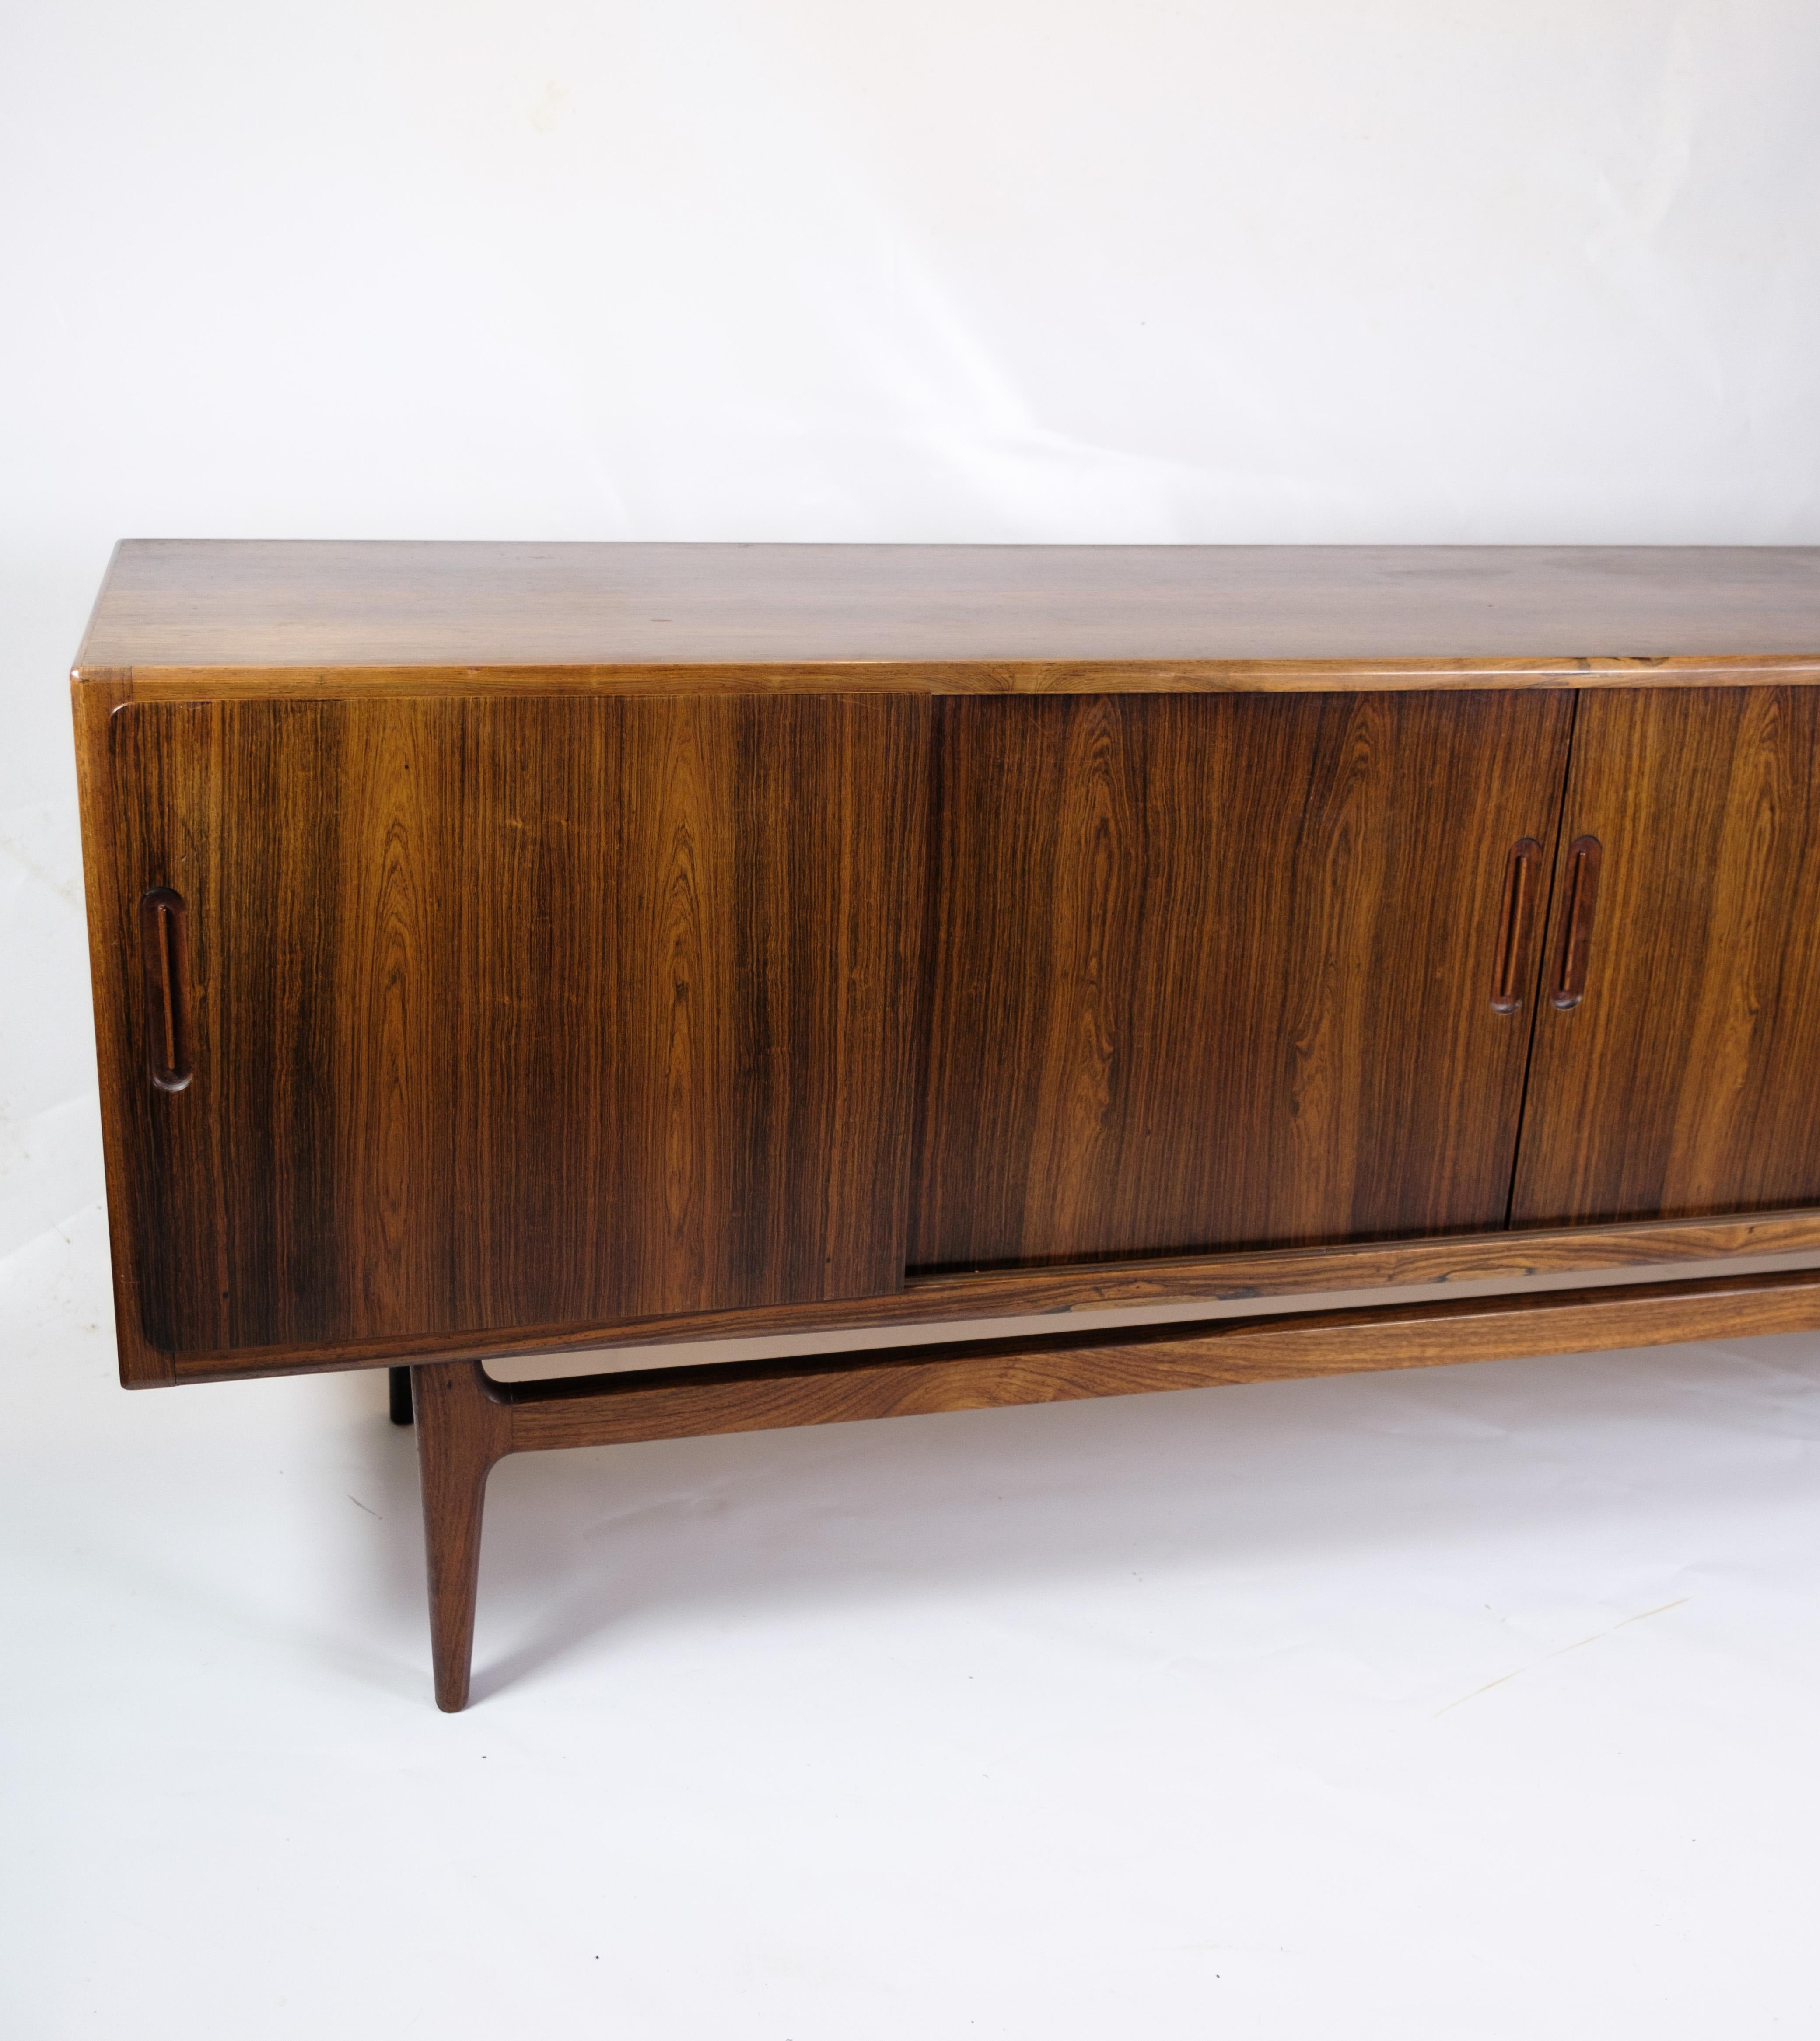 The sideboard is an impressive example of Danish furniture art from the 1960s, where rosewood was used to create beautiful and functional furniture. Rosewood and the solid rosewood legs give the sideboard an elegant and timeless appearance that fits